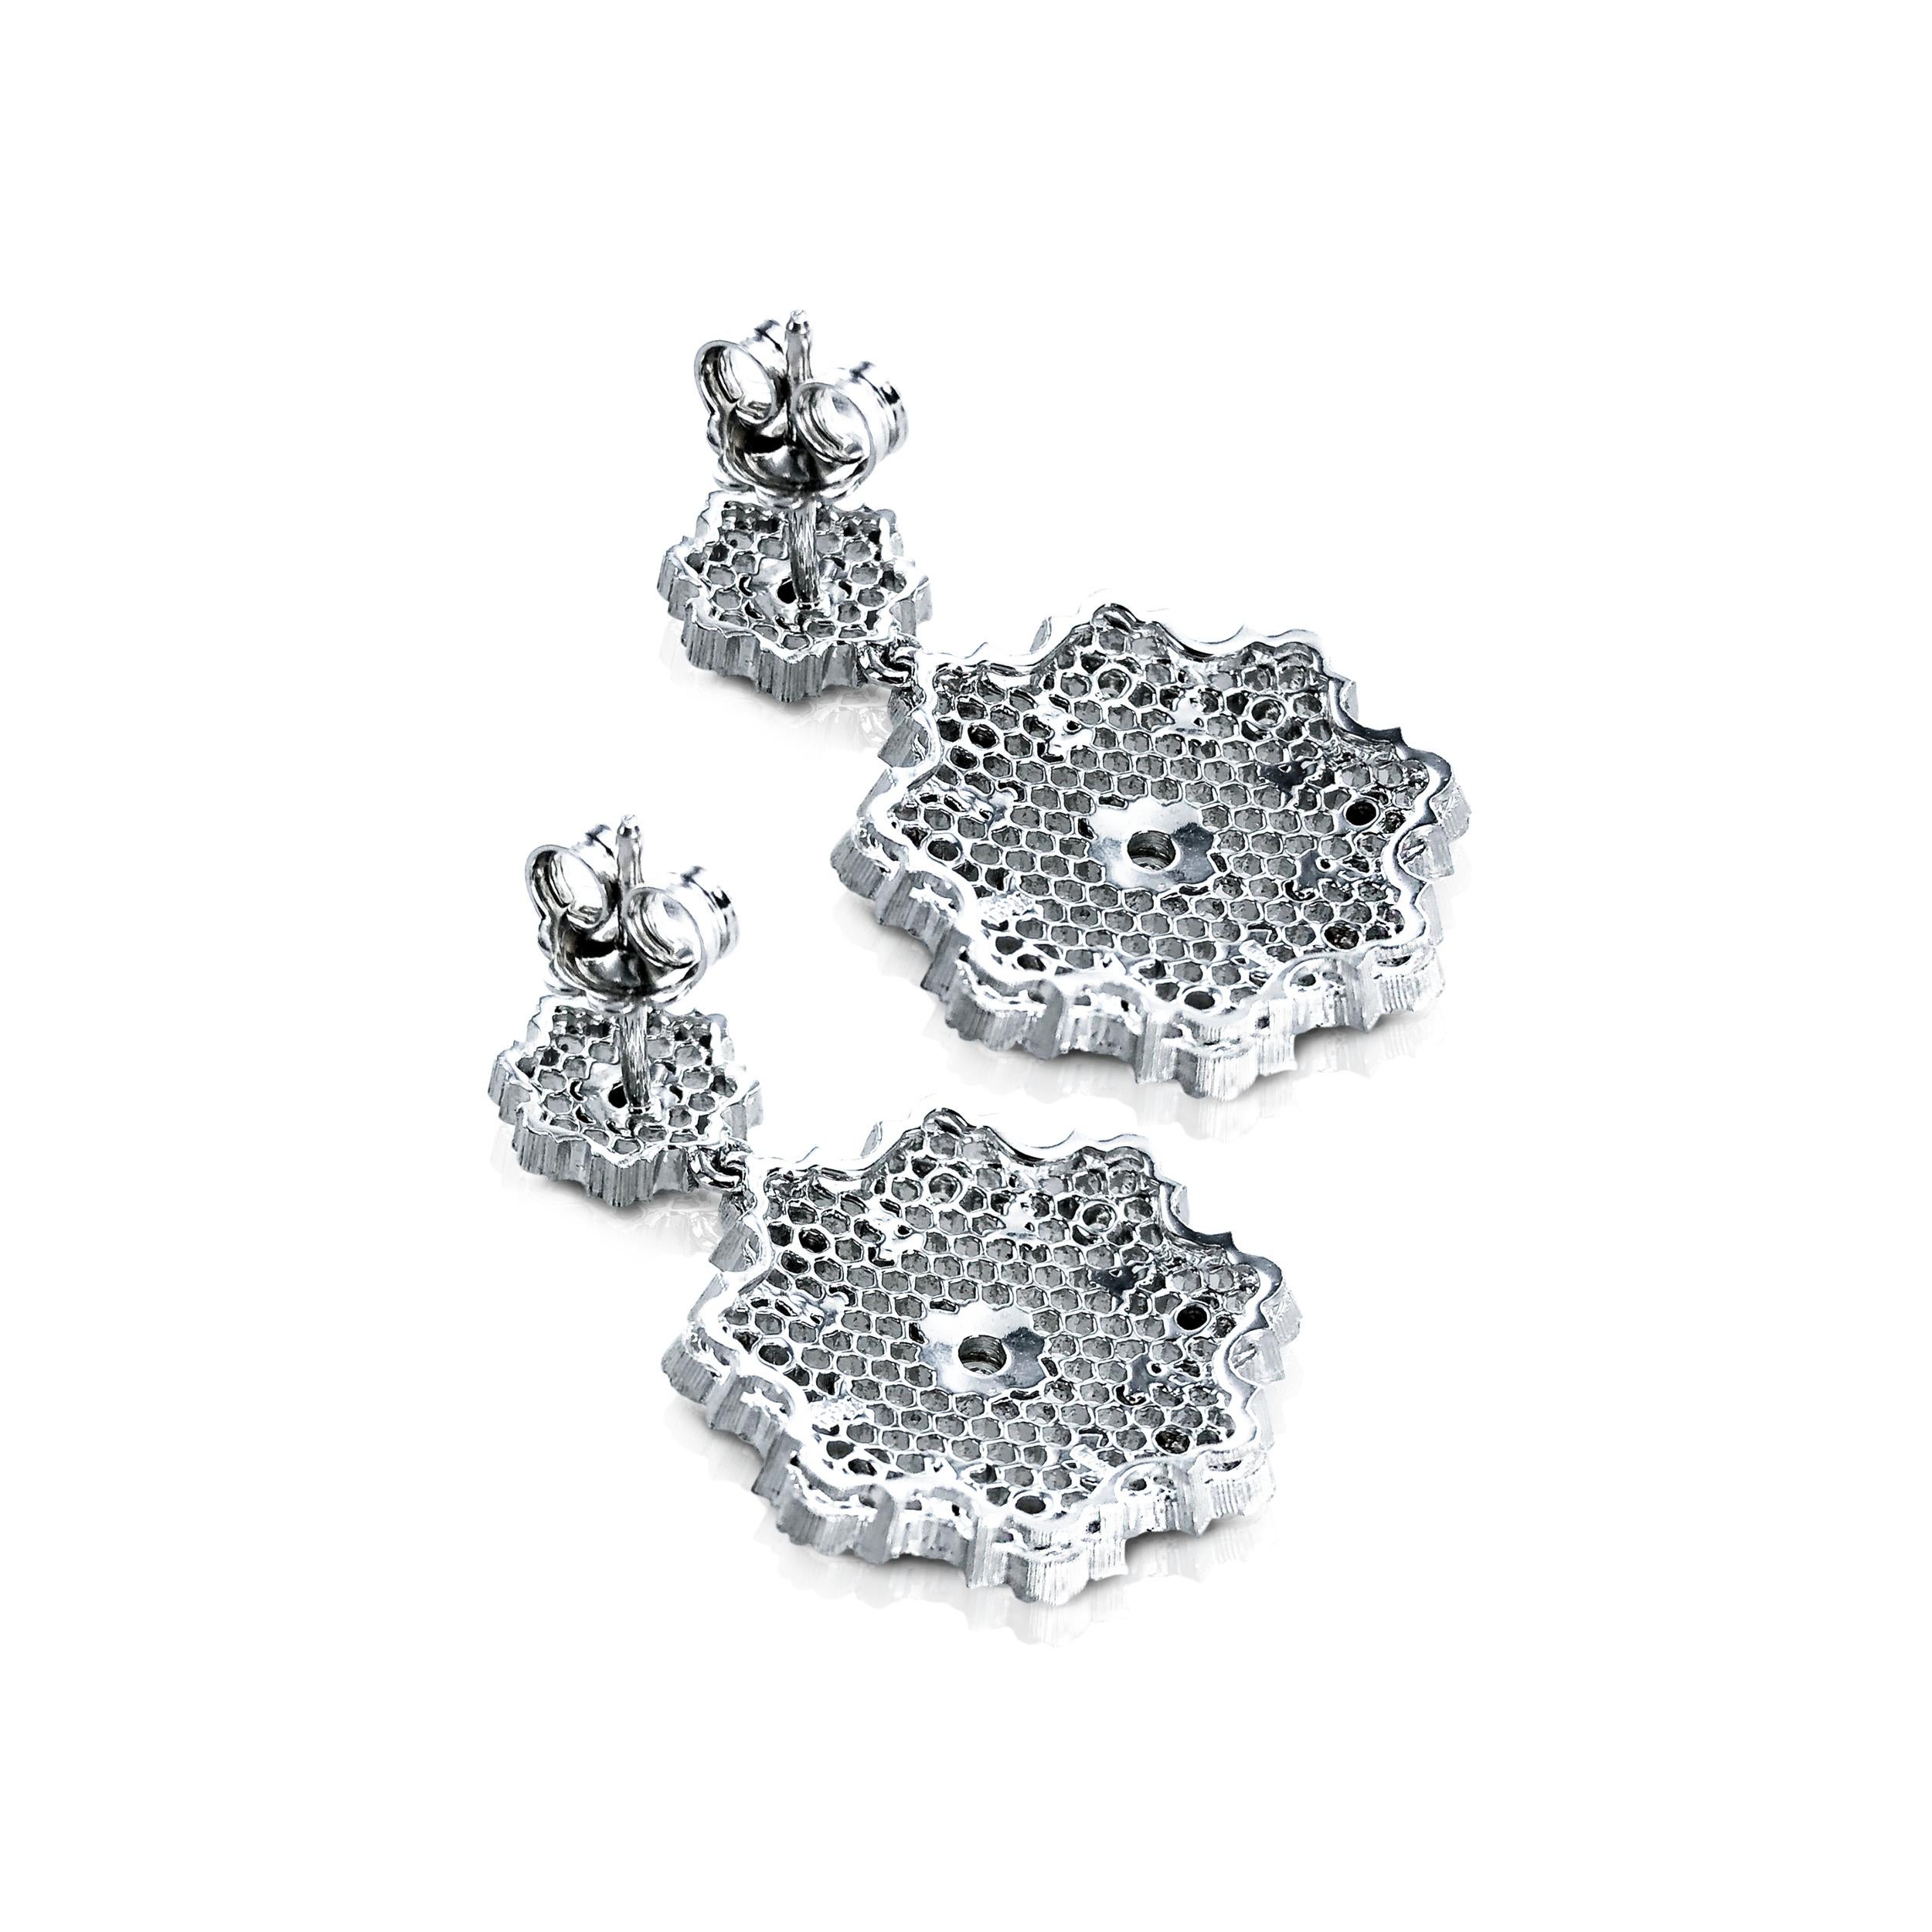 These Diamond 0.52 Carat 18Kt White Gold Dangling Earrings were designed and inspired by Leonardo da Vinci's architectural drawings, and incorporate the patented Leonardo da Vinci Cut Diamond.

Set in 18kt white Gold, the beautiful octagon shaped